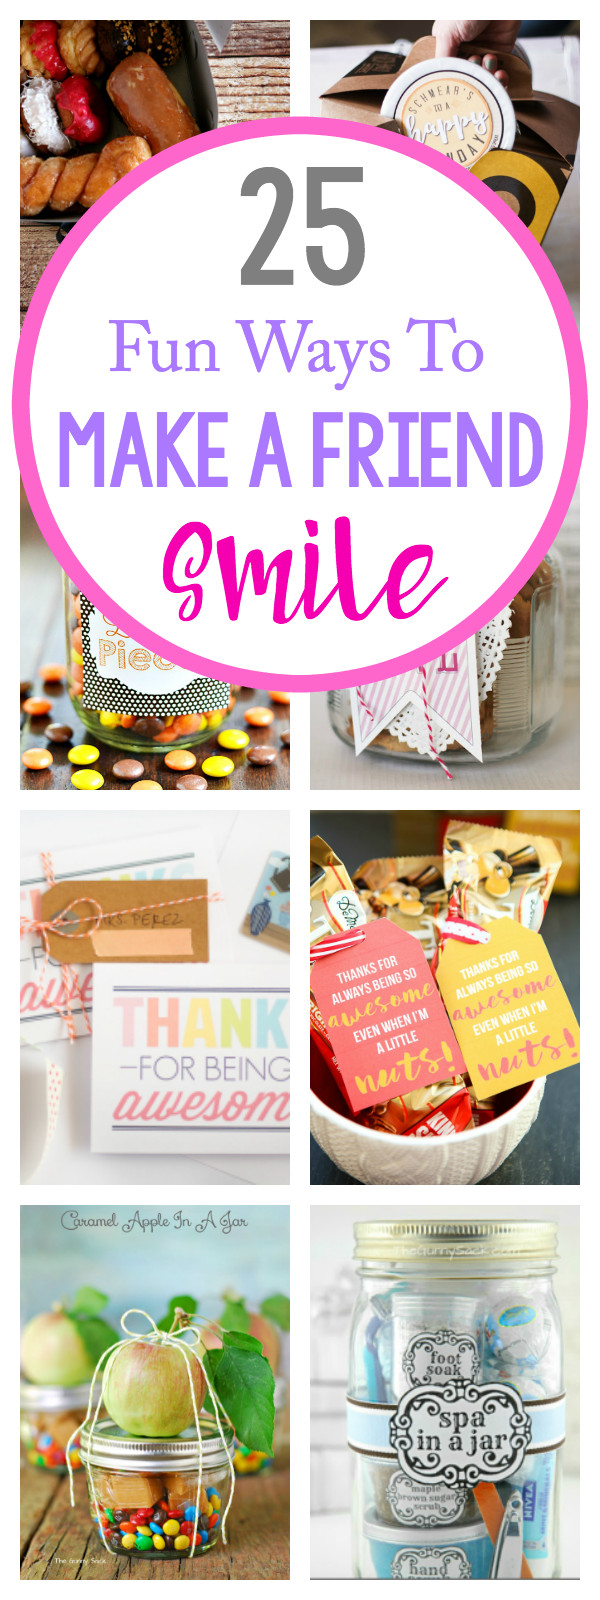 Thank You Gift Ideas For Friends
 Cute Gifts for Friends for Any Occasion – Fun Squared